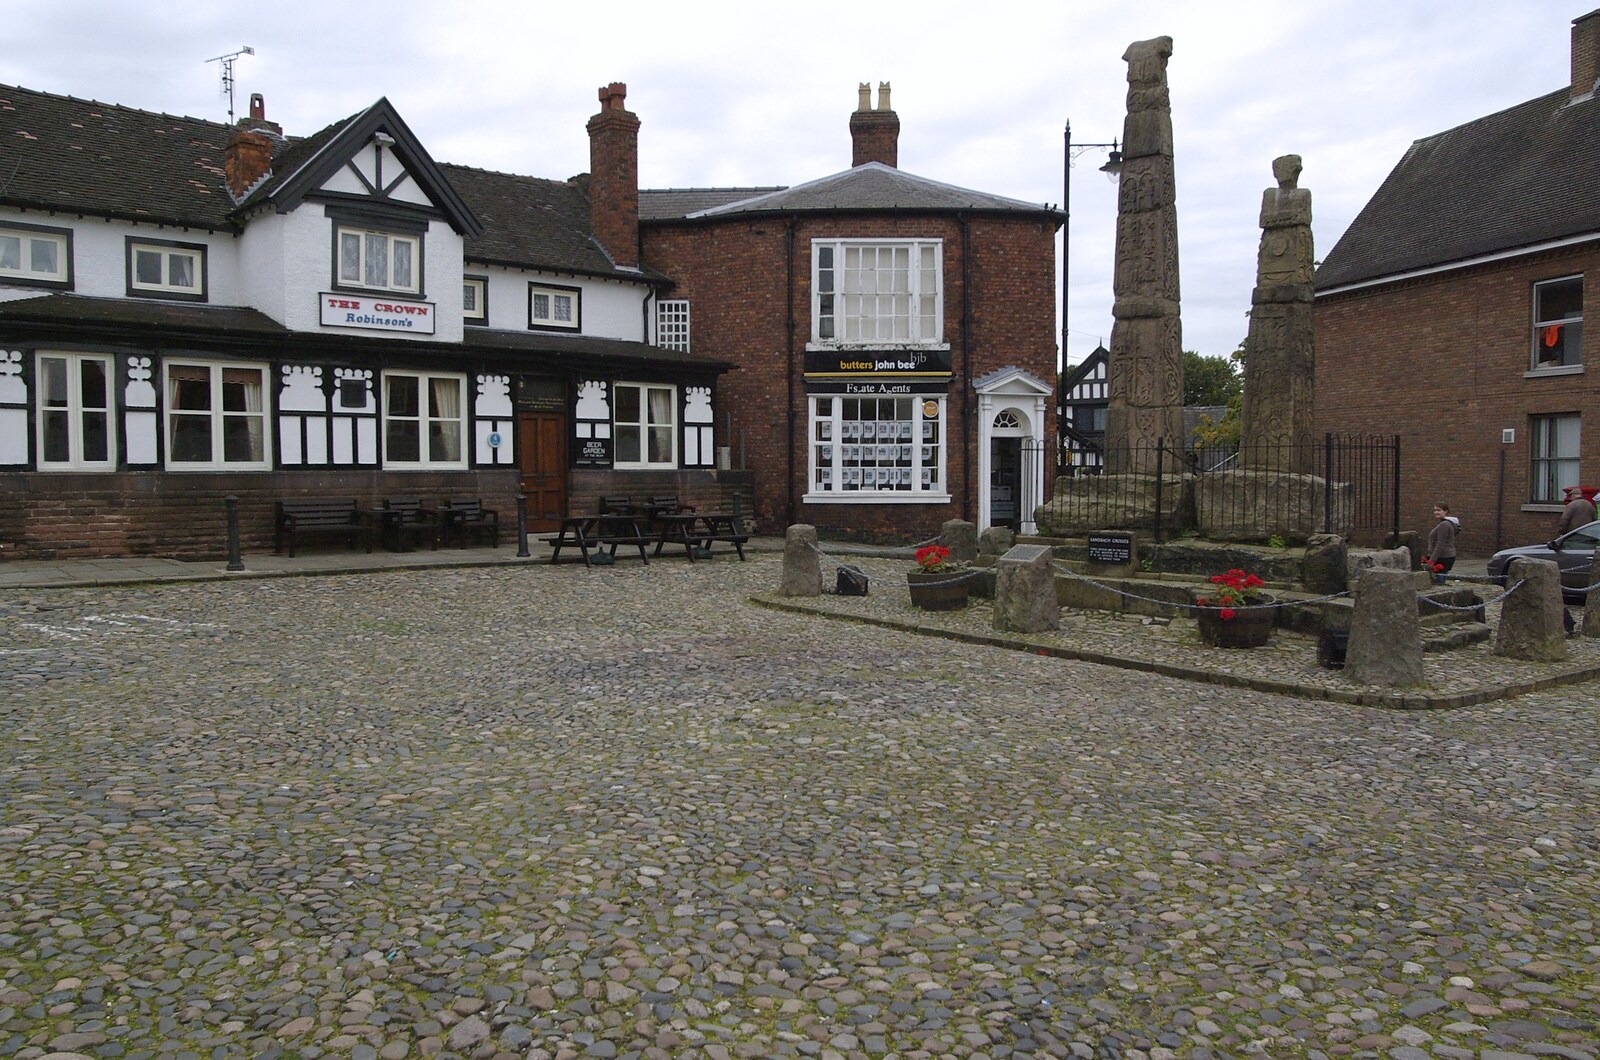 A Road Trip to Ireland Via Sandbach and Conwy, Cheshire and Wales - 21st September 2007: The Saxon crosses and the Crown pub, Sandbach